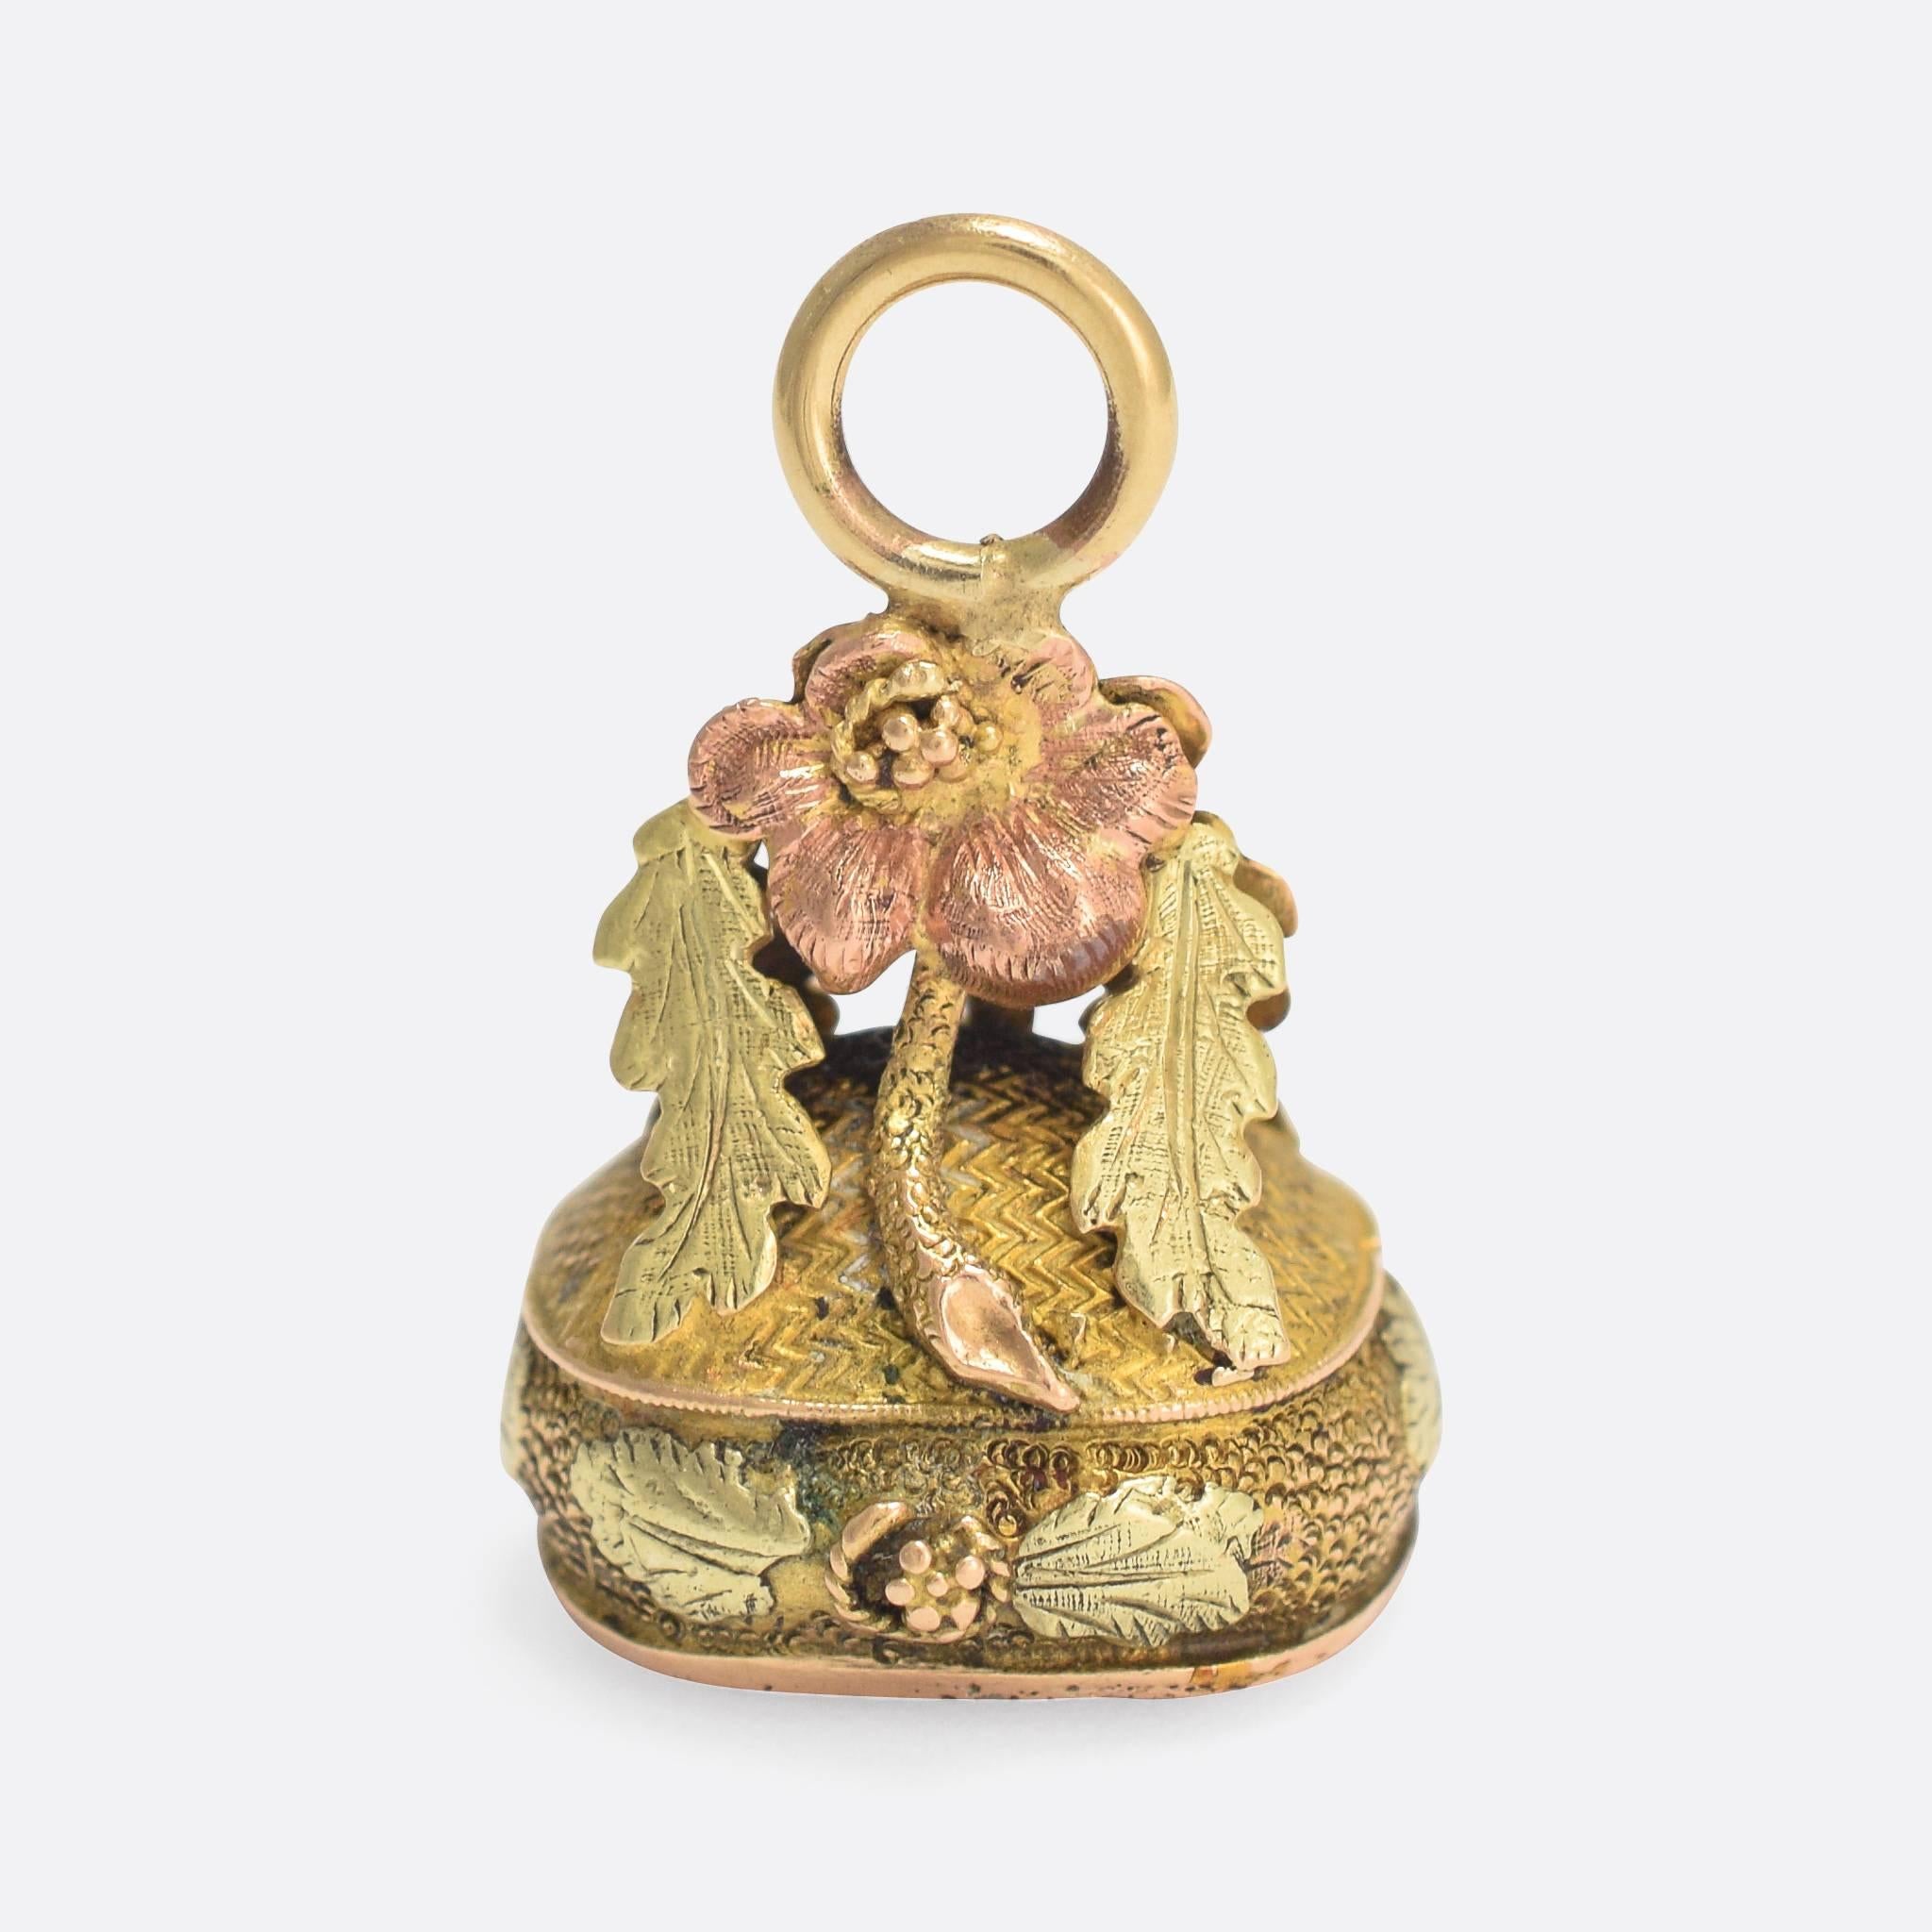 A beautiful antique fob pendant, unusually featuring a locket compartment in the bottom where we would expect to see a hardstone seal. The pieces has been expertly hand-crafted from three tones of 15 karat gold: yellow, rose, and green. The main